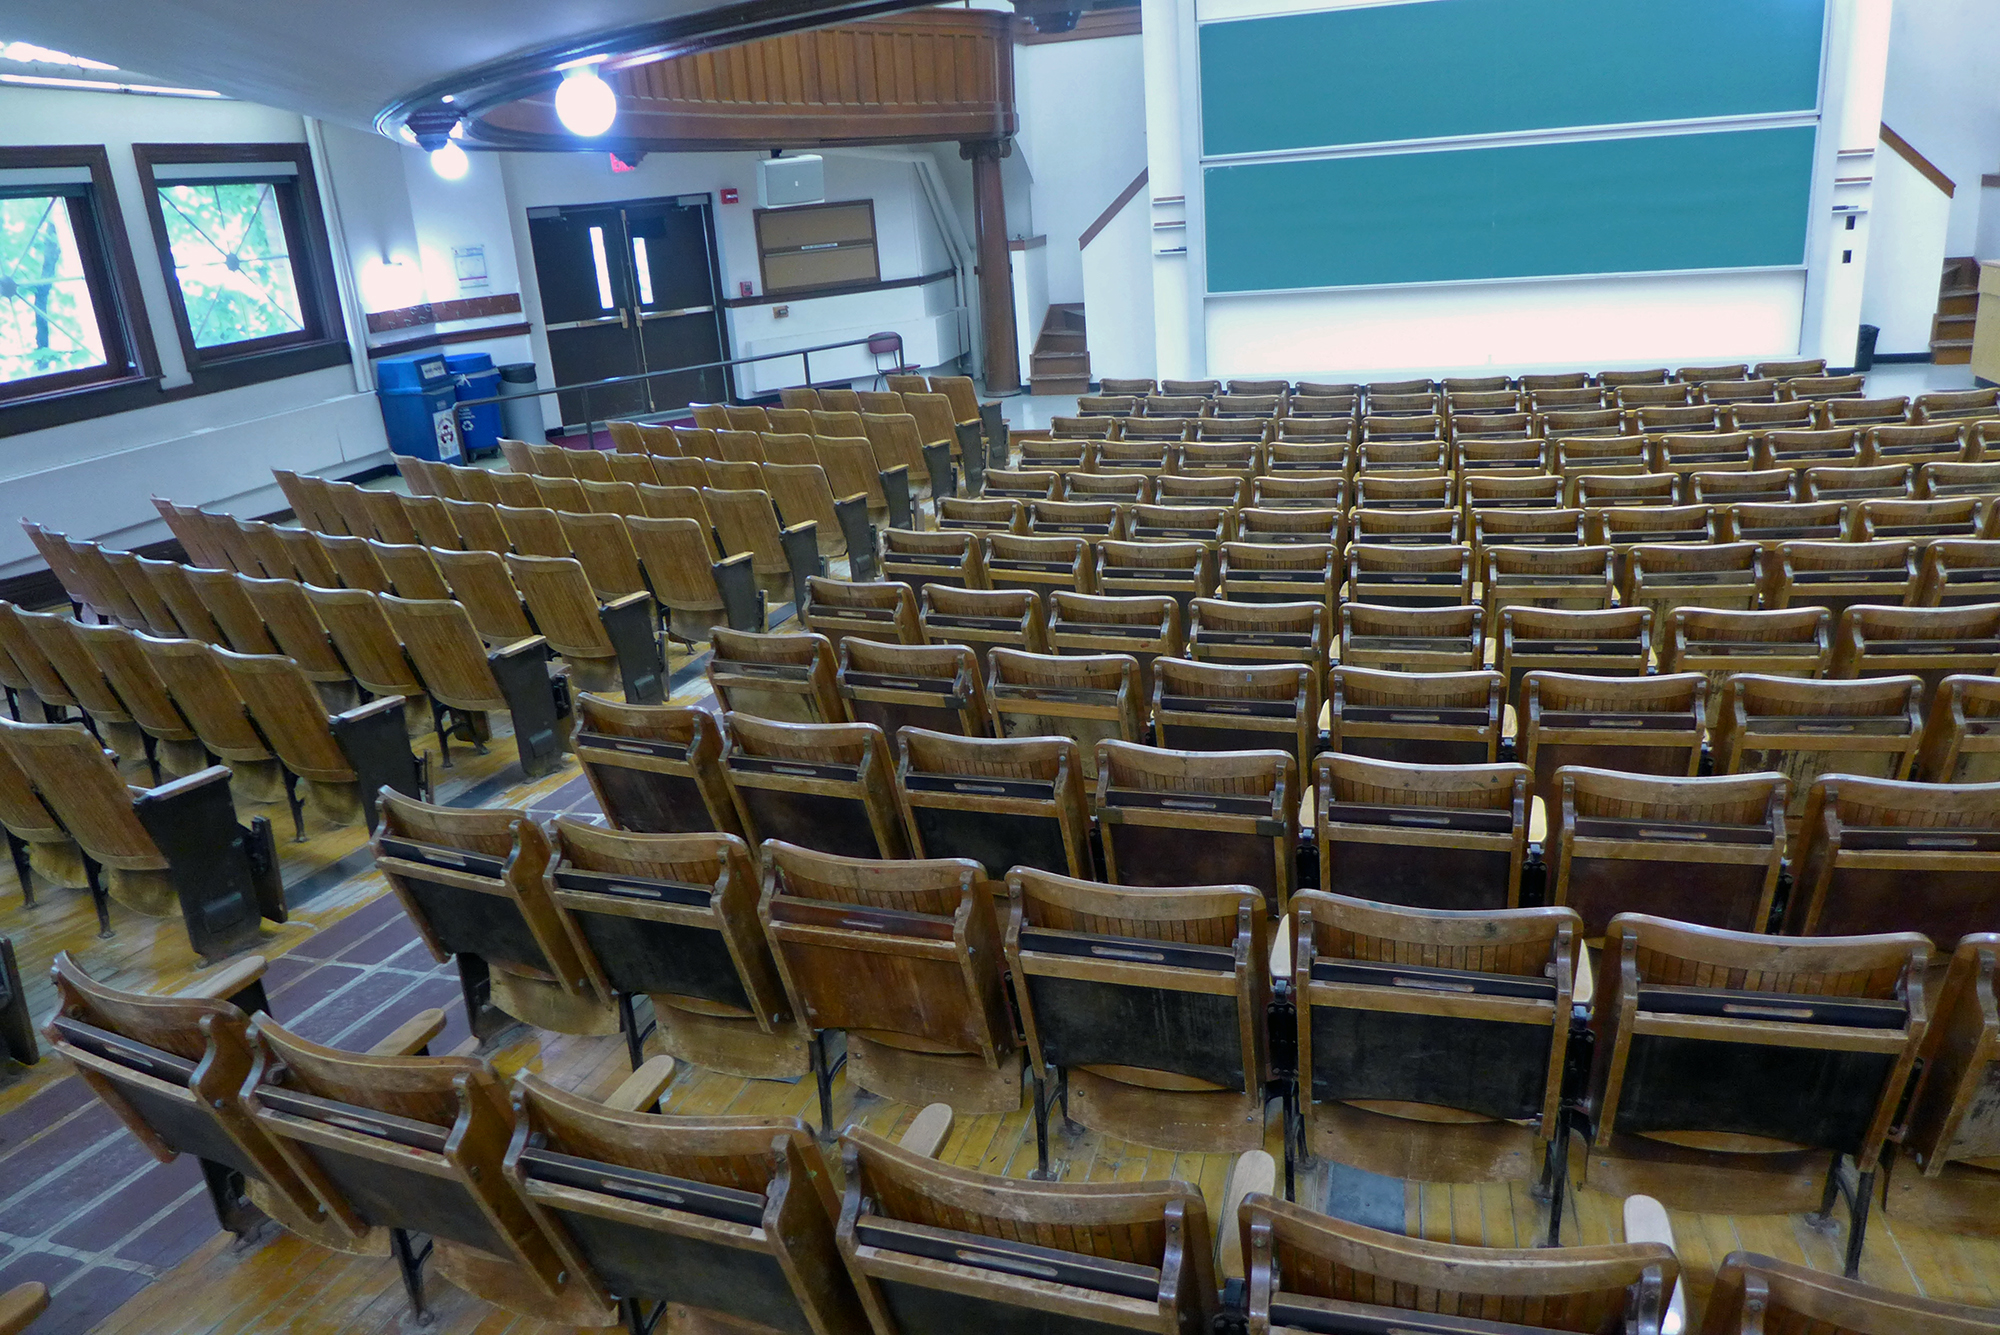 Classroom in Agriculture Hall on UW-Madison's campus